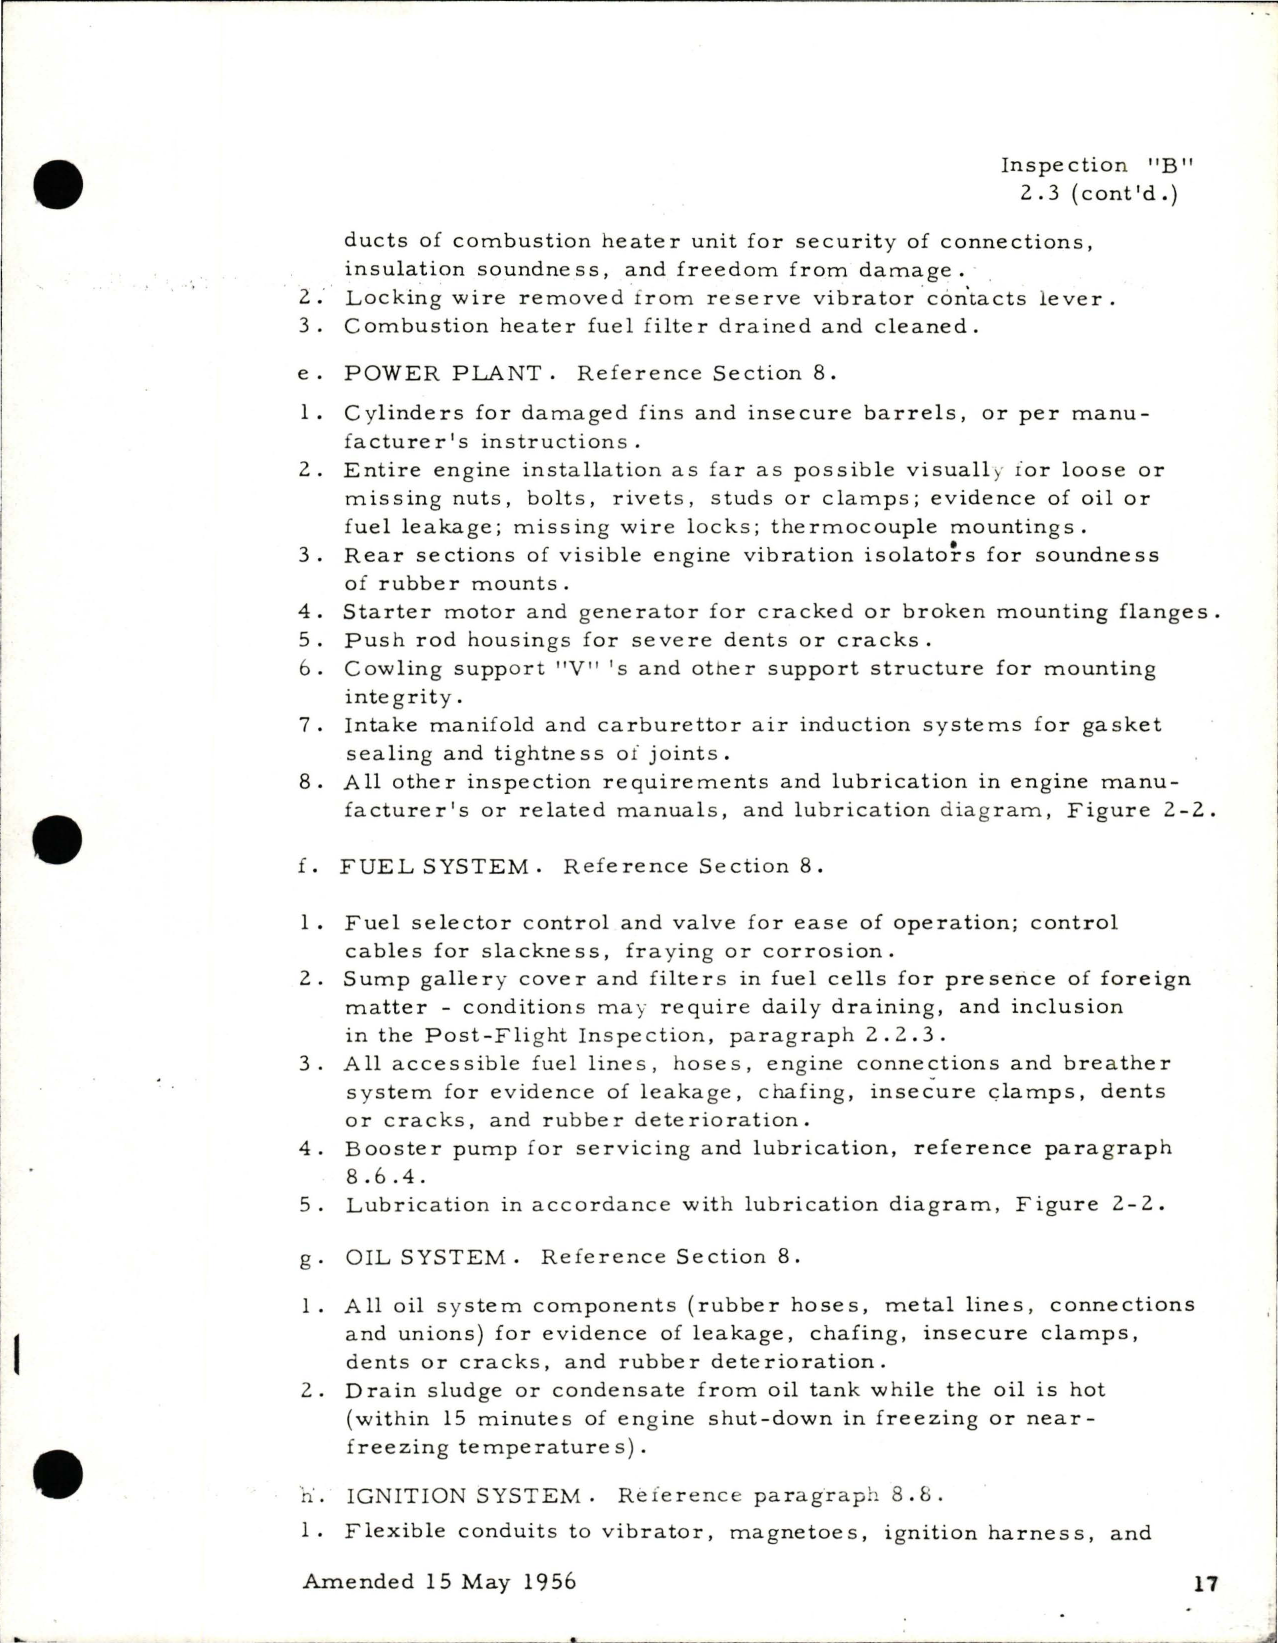 Sample page 9 from AirCorps Library document: Maintenance and Inspection for DHC-3 Otter